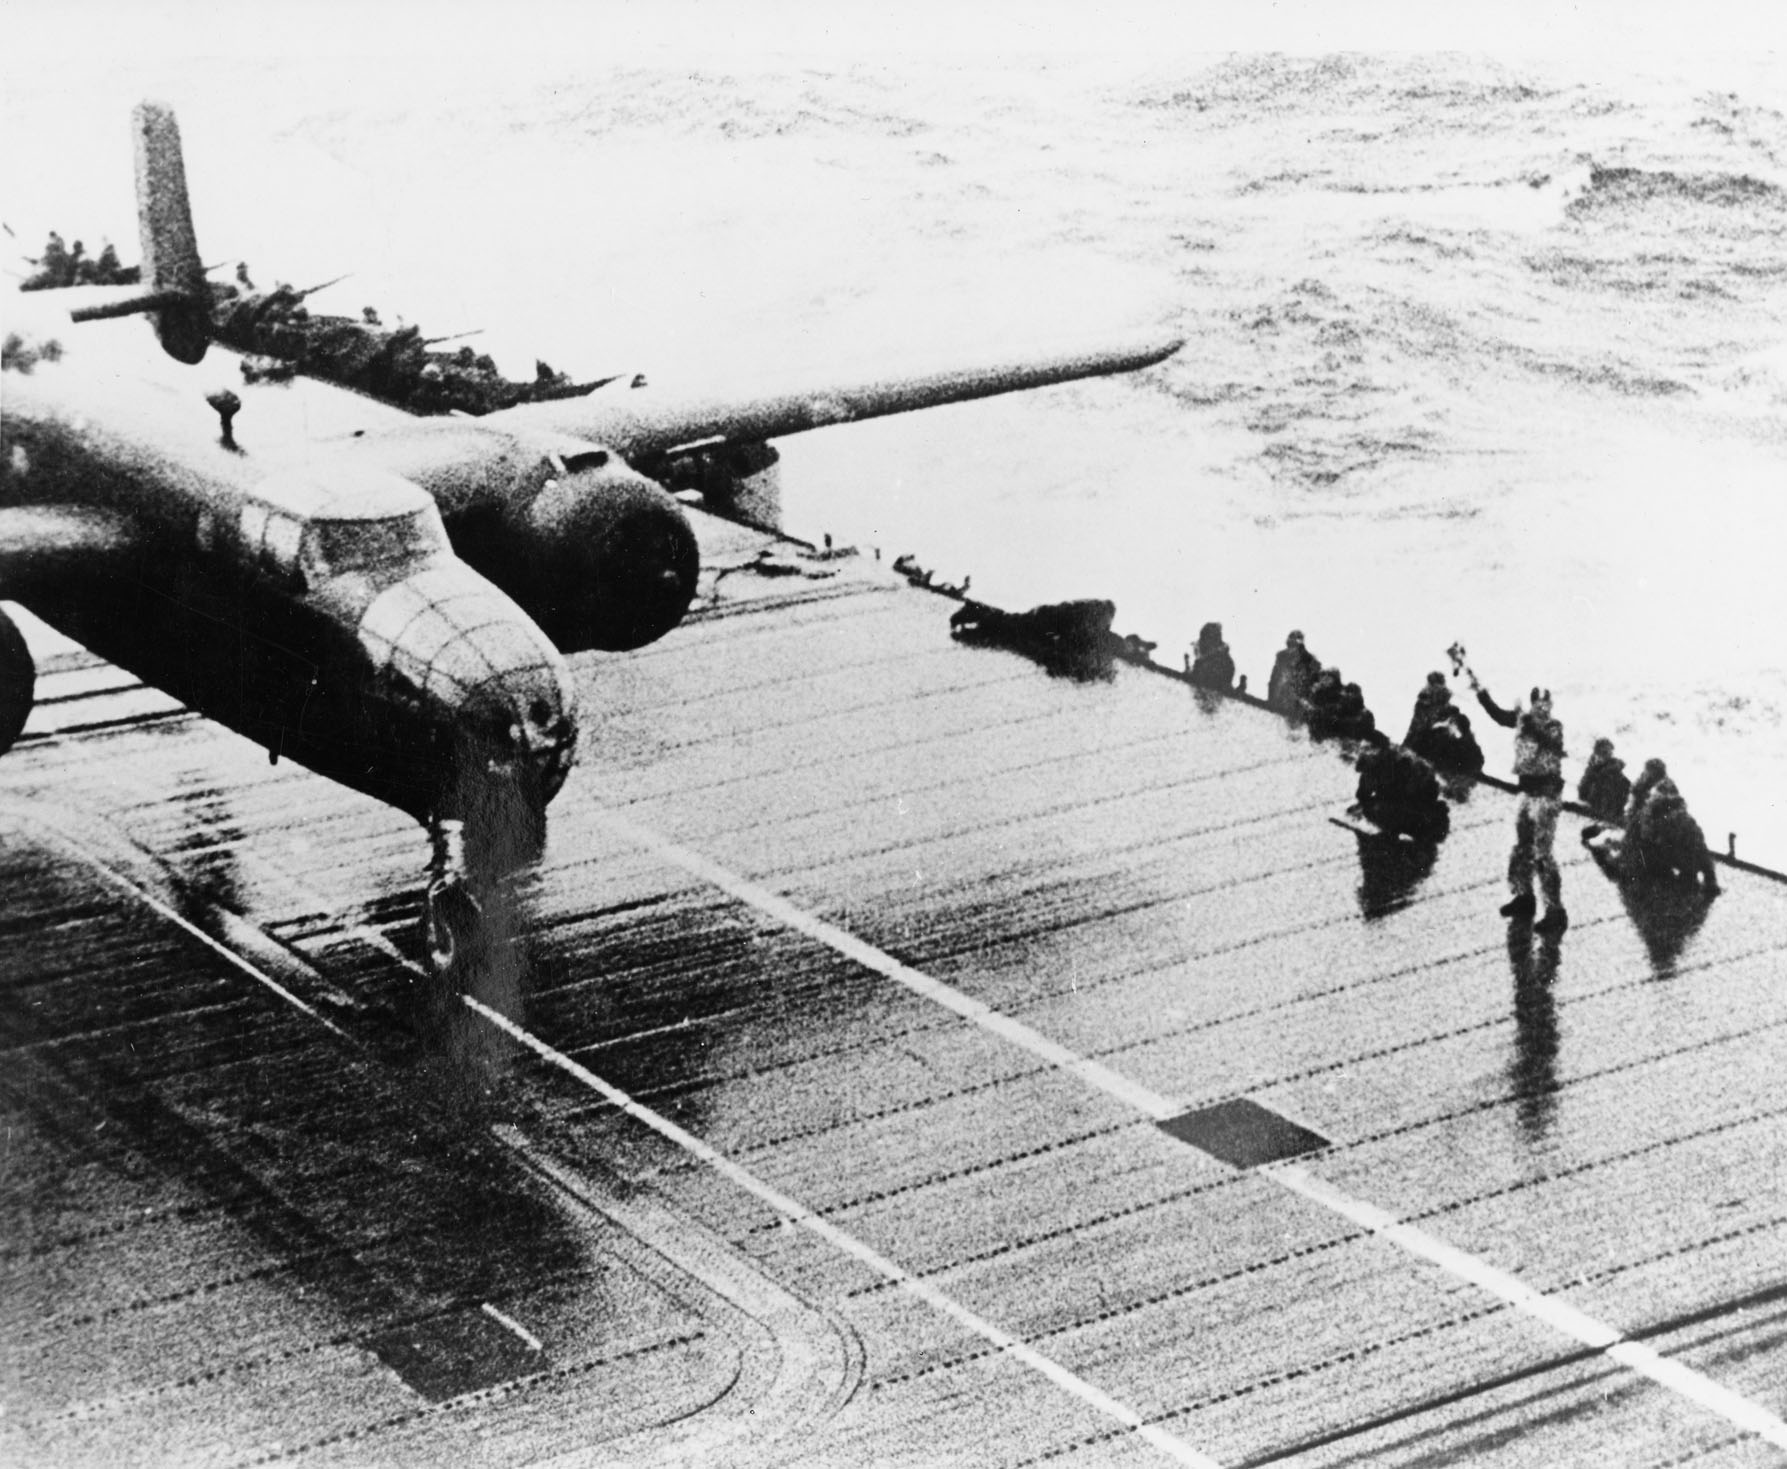  The aircraft carrier Hornet had 16 AAF B-25s on deck, ready for the Tokyo Raid. (U.S. Air Force photo) 4 of 4 DOWNLOAD HI-RES / PHOTO DETAILS The aircraft carrier Hornet had 16 AAF B-25s on deck, ready for the Tokyo Raid. (U.S. Air Force photo) DAYTON, Ohio -- Lt. Col. Richard “Dick” E. Cole, who served as Jimmy Doolittle’s co-pilot on Crew No. 1. Cole, now 101 years old, plans to return to the National Museum of the U.S. Air Force in April to commemorate the 75th anniversary of the raid. (U.S. Air Force photo by Jeff Fisher) 1 of 4 DOWNLOAD HI-RES / PHOTO DETAILS DAYTON, Ohio -- Lt. Col. Richard “Dick” E. Cole, who served as Jimmy Doolittle’s co-pilot on Crew No. 1. Cole, now 101 years old, plans to return to the National Museum of the U.S. Air Force in April to commemorate the 75th anniversary of the raid. (U.S. Air Force photo by Jeff Fisher) On 18 April 1942, airmen of the US Army Air Forces, led by Lt. Col. James H. (Jimmy) Doolittle, carried the Battle of the Pacific to the heart of the Japanese empire with a surprising and daring raid on military targets at Tokyo, Yokohama, Yokosuka, Nagoya, and Kobe. This heroic attack against these major cities was the result of coordination between the Army Air Forces and the US Navy, which carried the sixteen North American B-25 medium bombers aboard the carrier USS Hornet to within take-off distance of the Japanese Islands. Here, a pair of alert escorts follow the USS Hornet to protect her lethal cargo of B-25 bombers. (U.S. Air Force Photo) 2 of 4 DOWNLOAD HI-RES / PHOTO DETAILS On 18 April 1942, airmen of the US Army Air Forces, led by Lt. Col. James H. (Jimmy) Doolittle, carried the Battle of the Pacific to the heart of the Japanese empire with a surprising and daring raid on military targets at Tokyo, Yokohama, Yokosuka, Nagoya, and Kobe. This heroic attack against these major cities was the result of coordination between the Army Air Forces and the US Navy, which carried the sixteen North American B-25 medium bombers aboard the carrier USS Hornet to within take-off distance of the Japanese Islands. Here, a pair of alert escorts follow the USS Hornet to protect her lethal cargo of B-25 bombers. (U.S. Air Force Photo) 